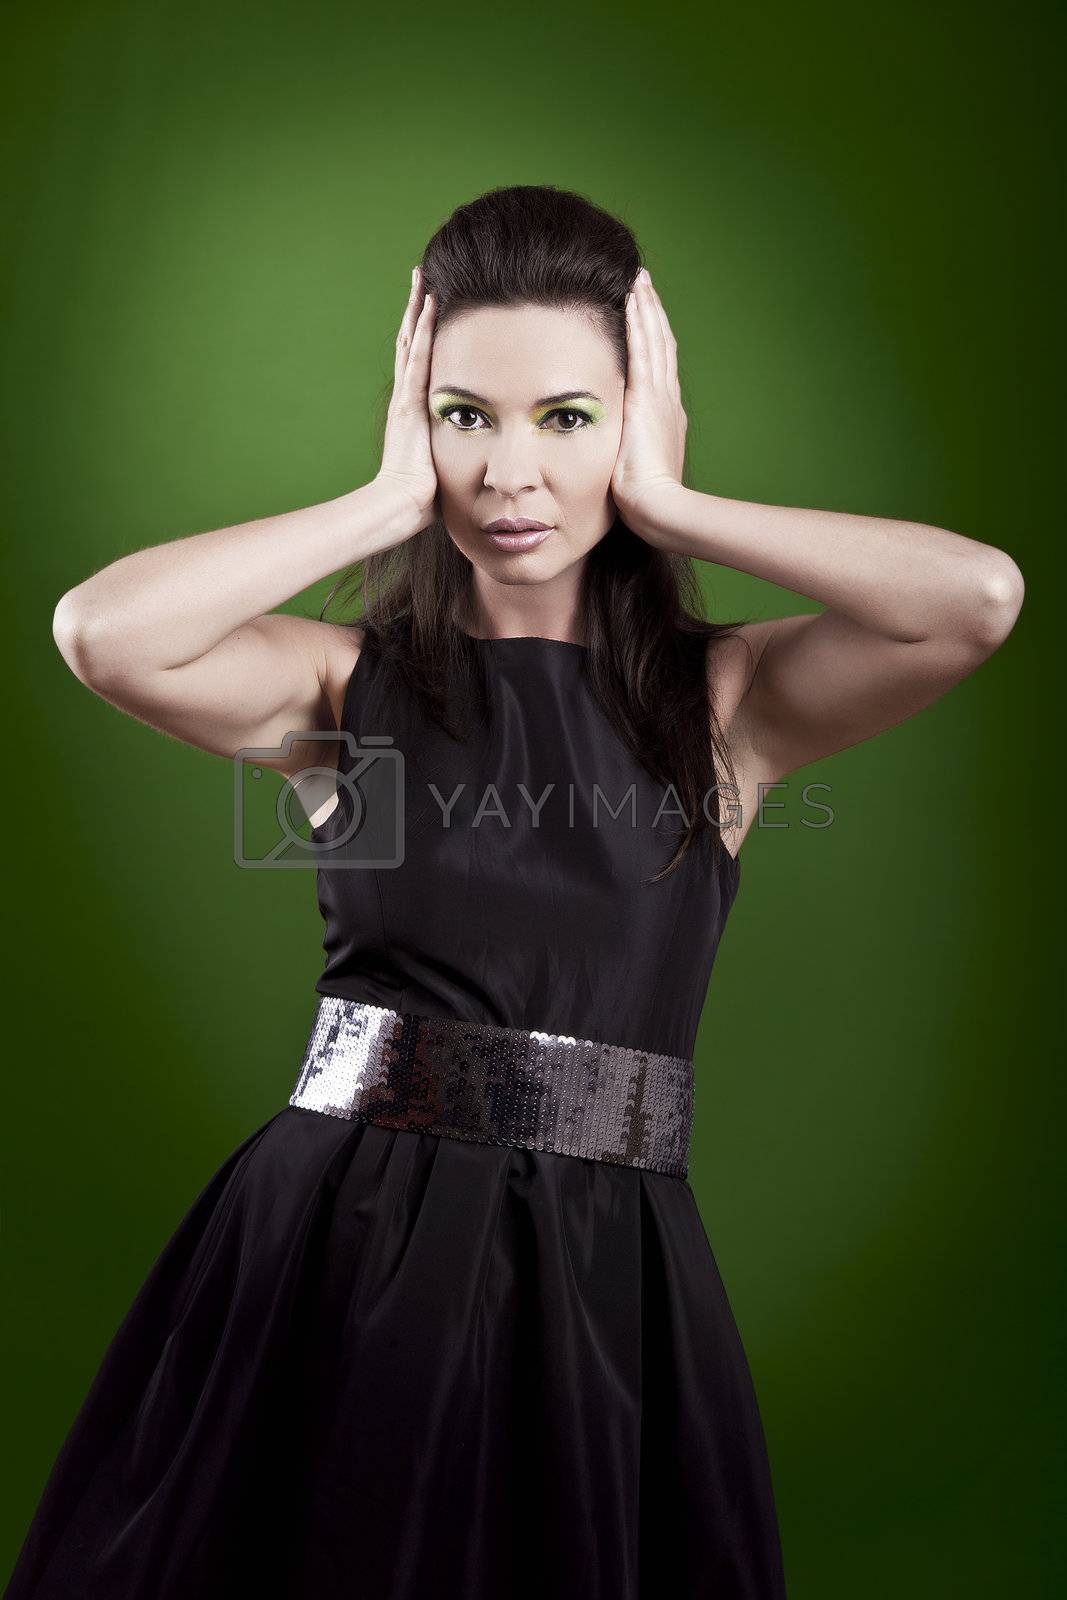 Royalty free image of Fashion woman by Iko